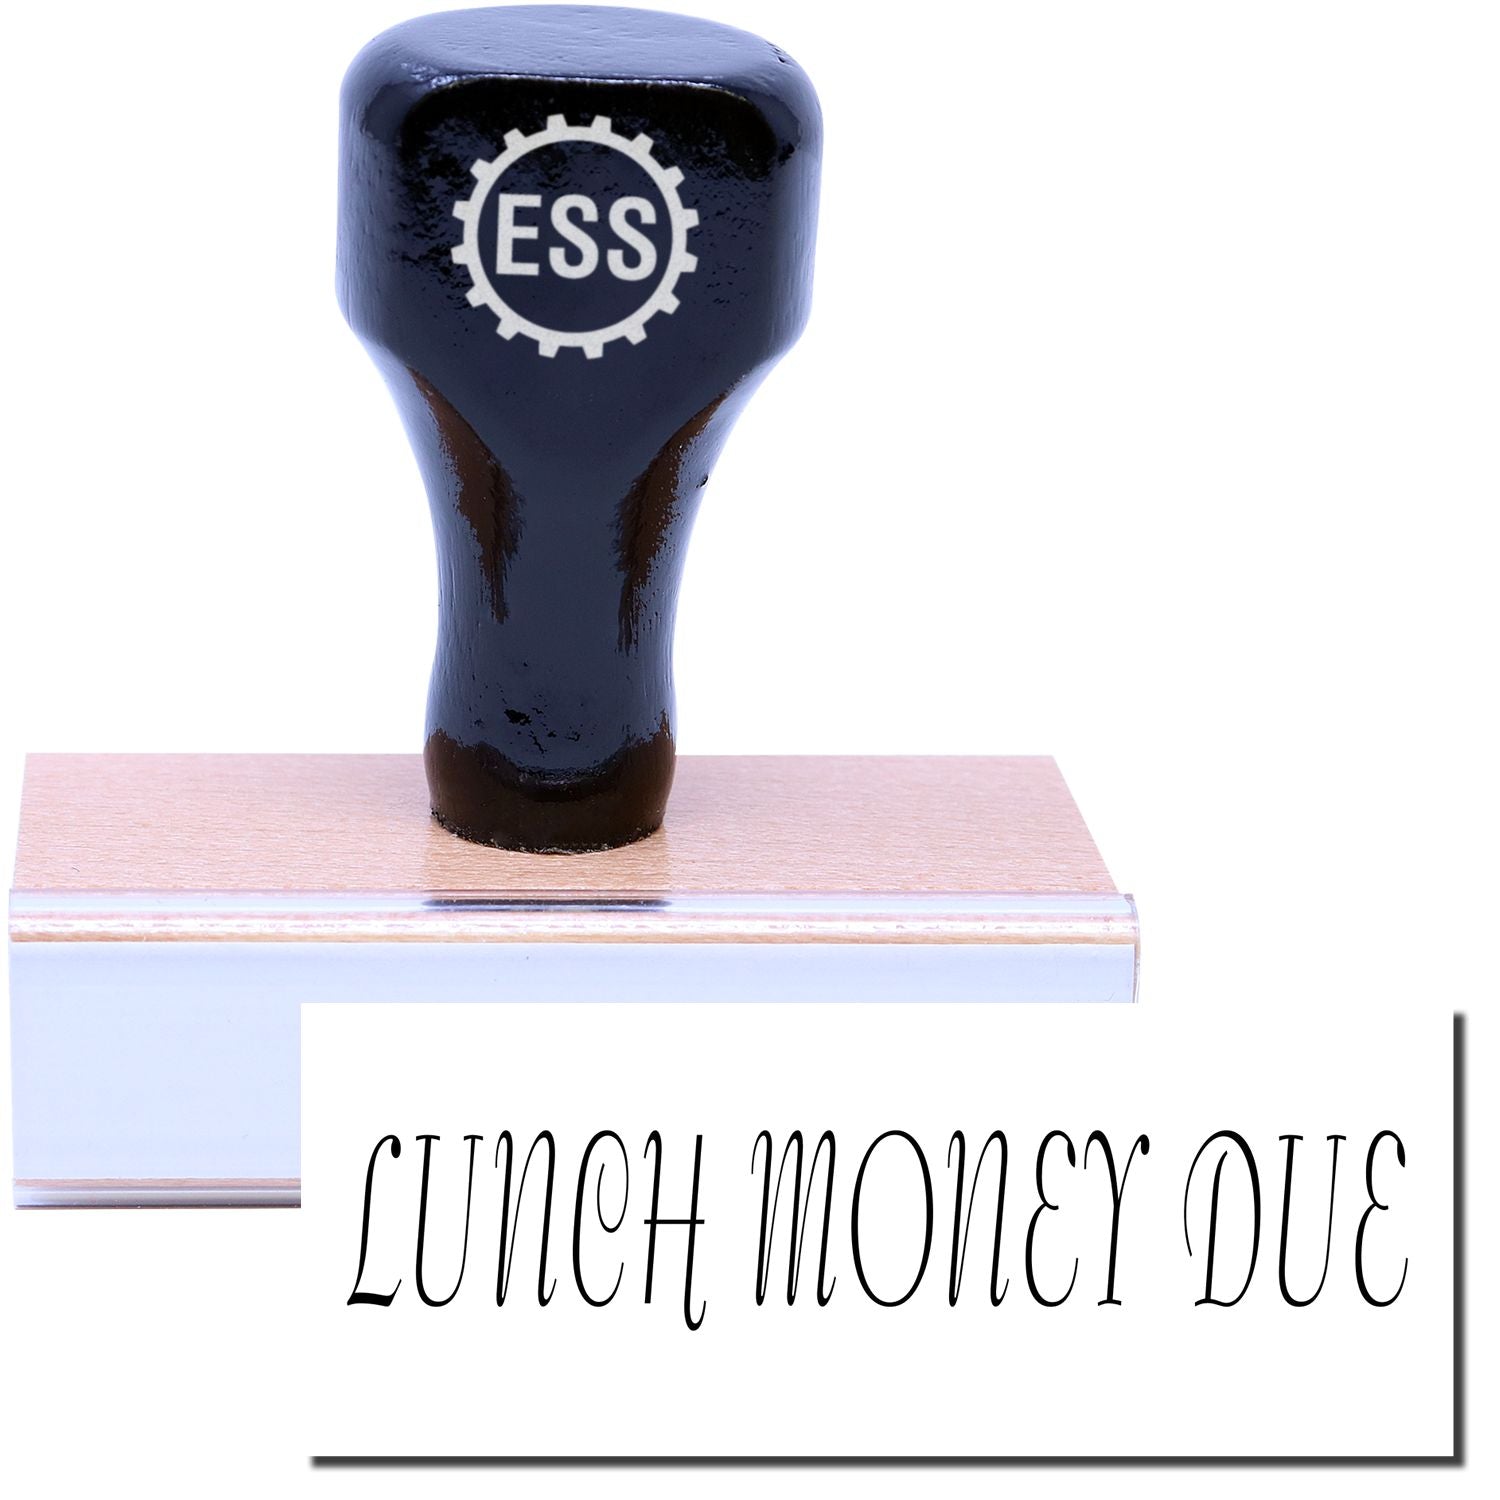 A stock office rubber stamp with a stamped image showing how the text "LUNCH MONEY DUE" is displayed after stamping.